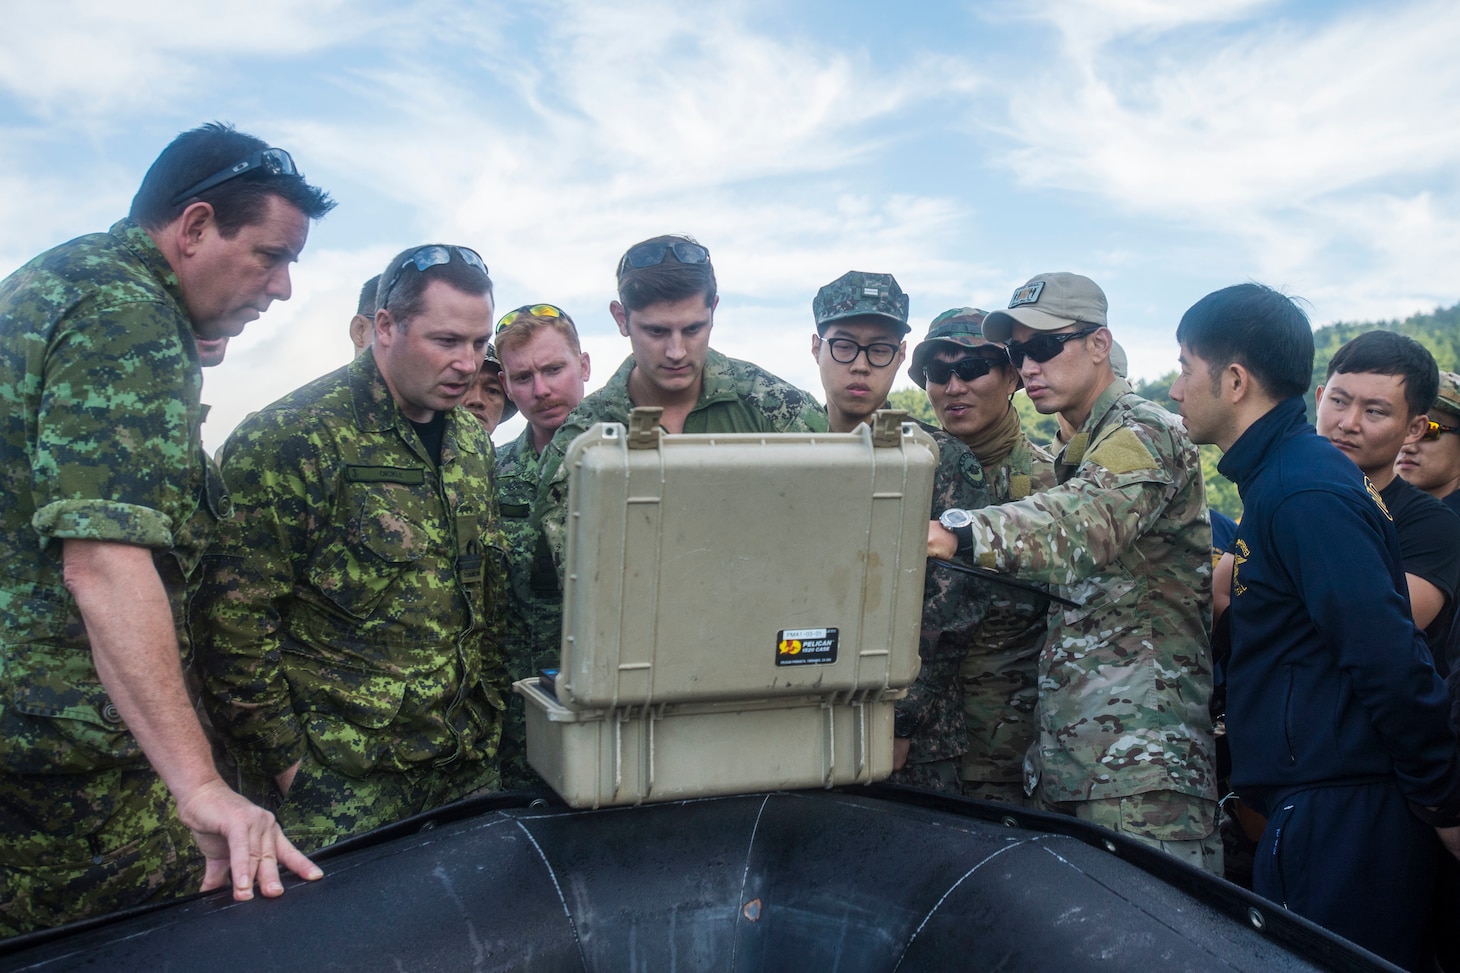 Navy Lt. j.g. Jonathon Ferris reviews the mission data from a MK 18 MOD 1 Underwater Unmanned Vehicle with participants in Clear Horizon in Chinhae, Korea, Oct. 17, 2016. CH16 is a live-action exercise which enhances cooperation and improves capabilities in mine countermeasures operations, with participating nations including Republic of Korea Navy, United States, Australia, Canada, New Zealand, Philippines, Thailand, and the United Kingdom. Ferris is assigned to Explosive Ordnance Disposal Mobile Unit 1. Navy photo by Petty Officer 2nd Class Daniel Rolston